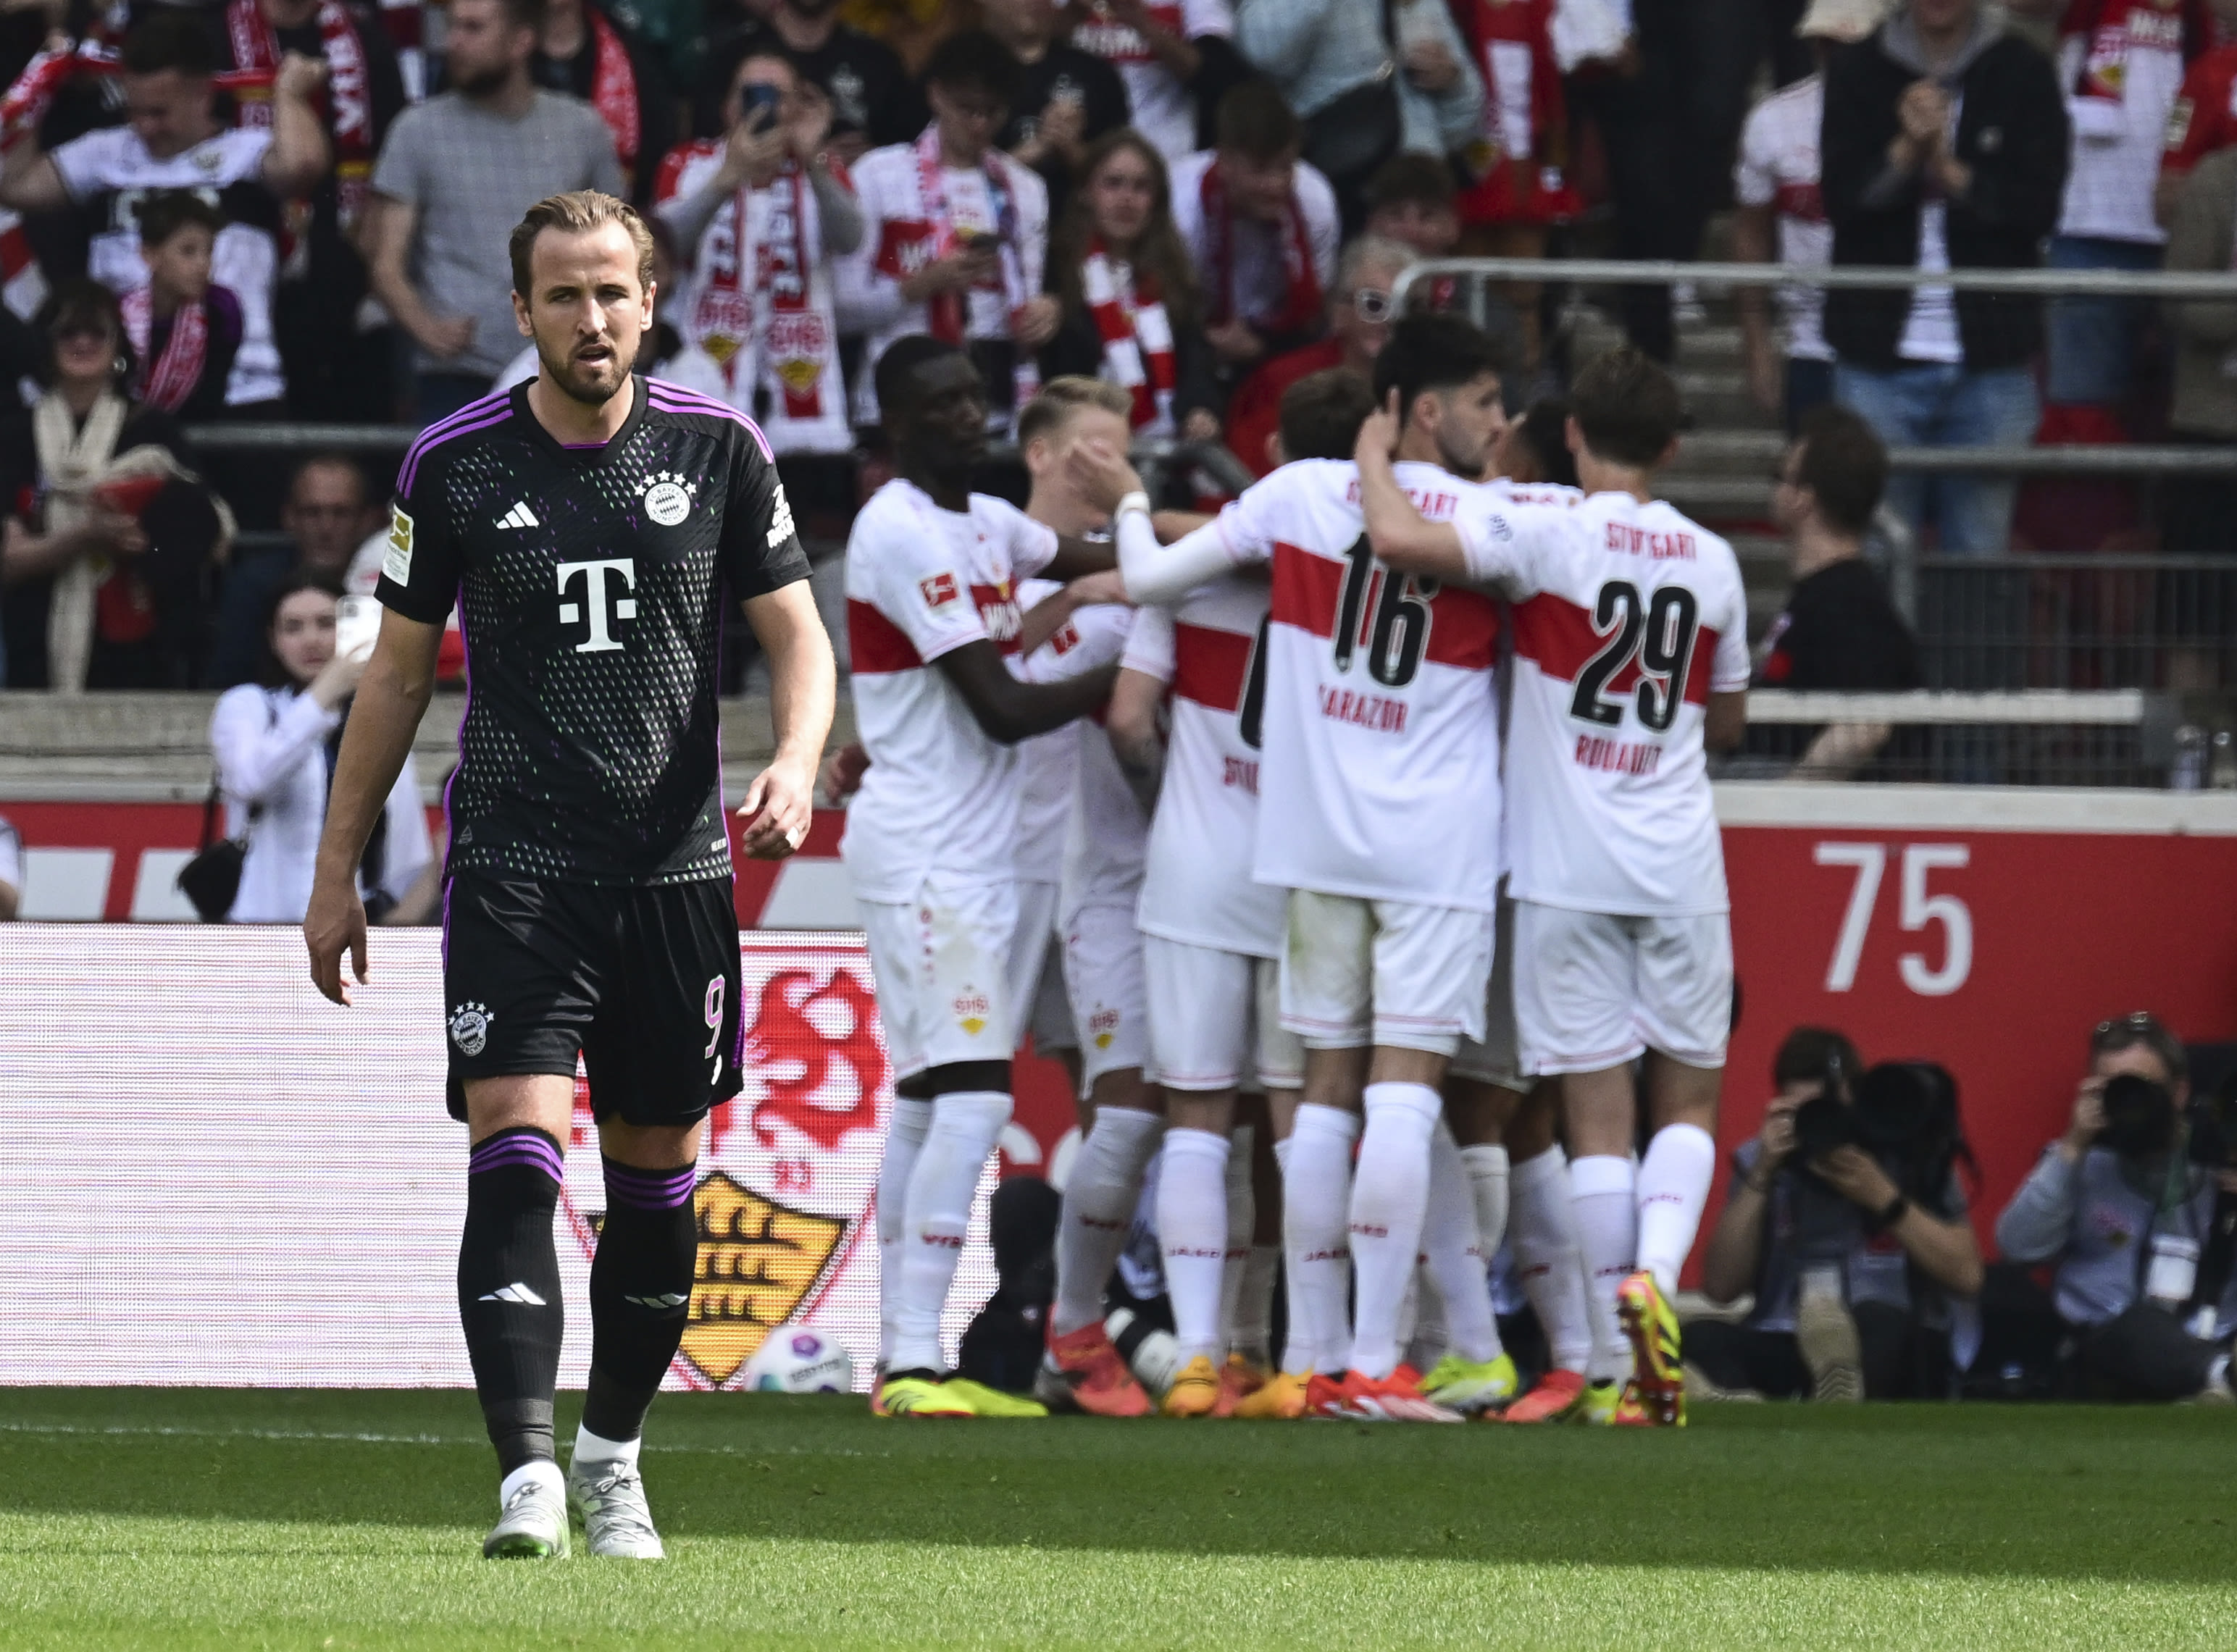 Bayern emerges beaten and bruised from last Real Madrid warmup. Dortmund routs Augsburg ahead of PSG